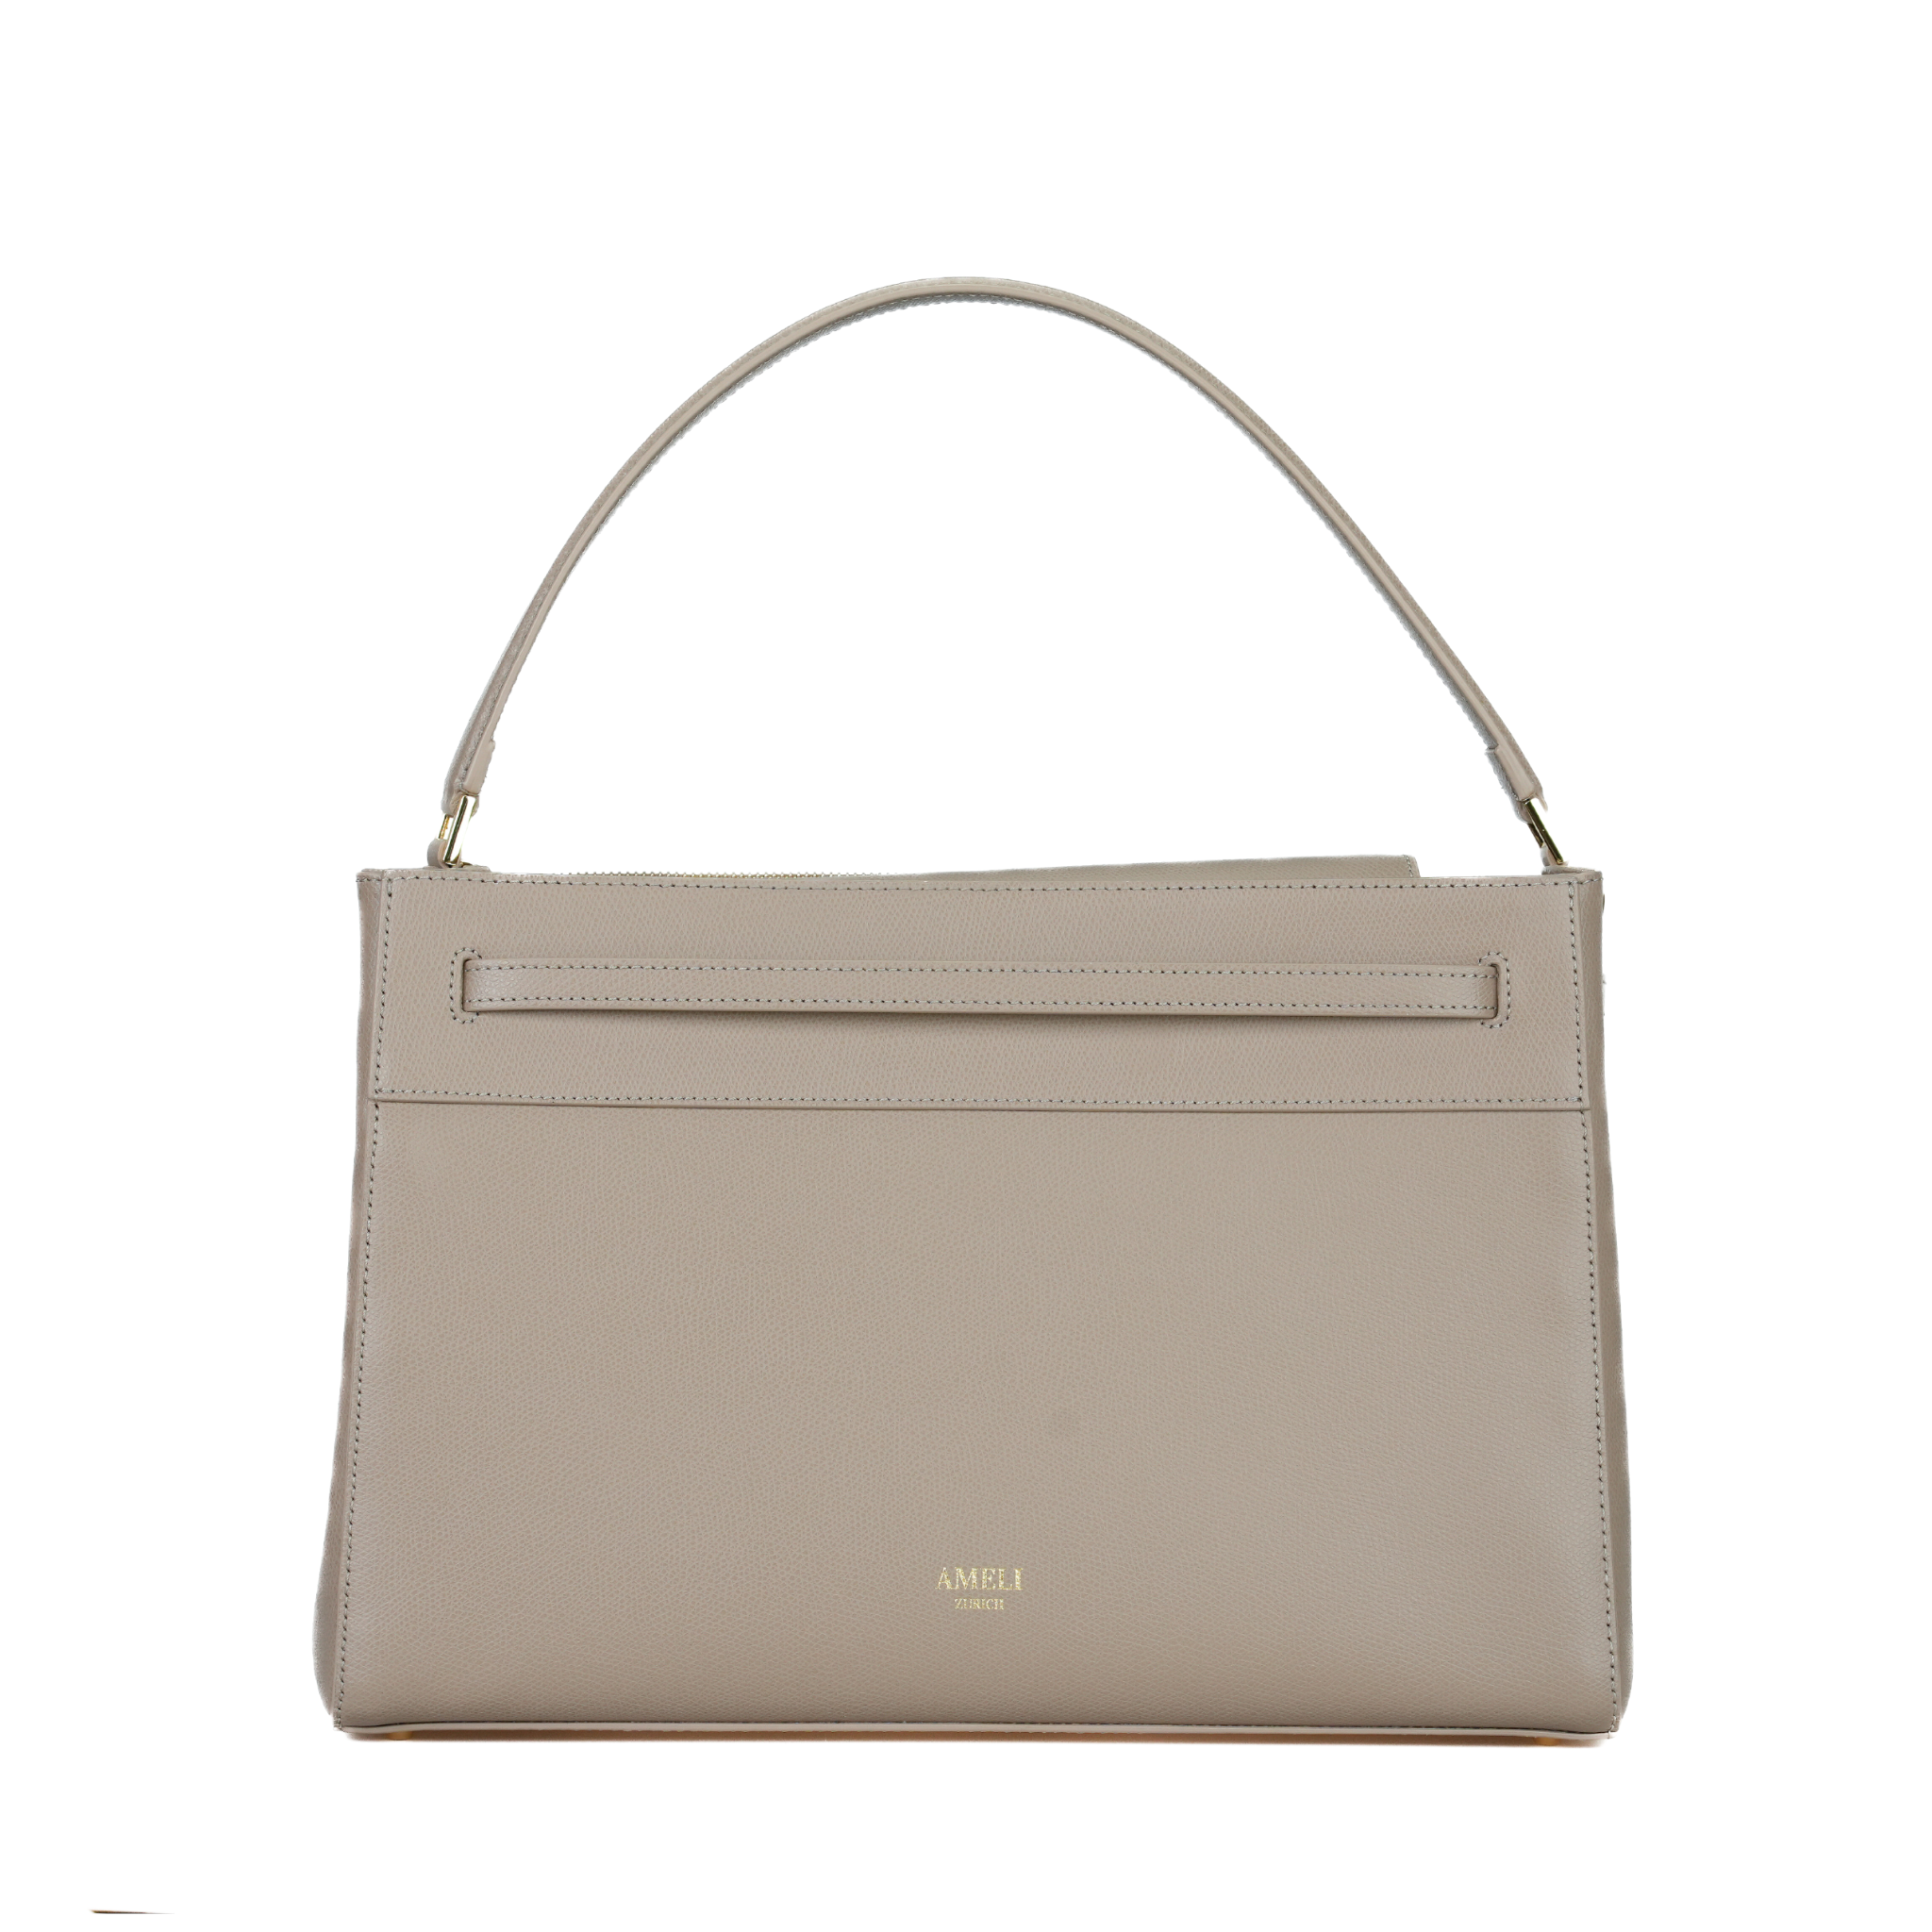 AMELI Zurich | SEEFELD | Cappuccino | Pebbled Leather | Front